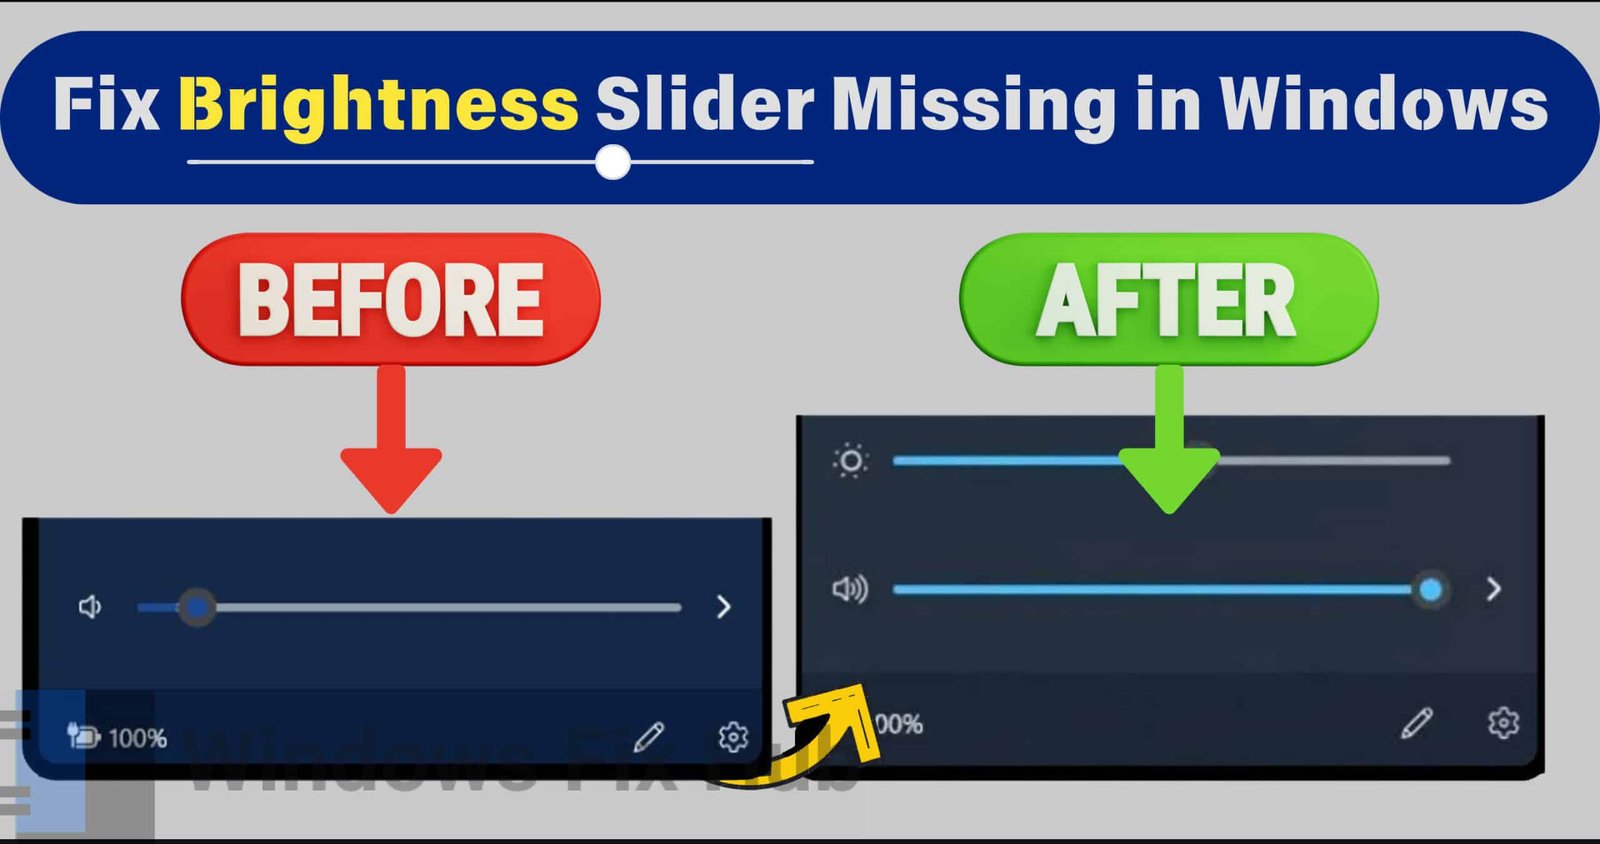 Ultimate Guide to Fix Brightness Slider Missing in Windows